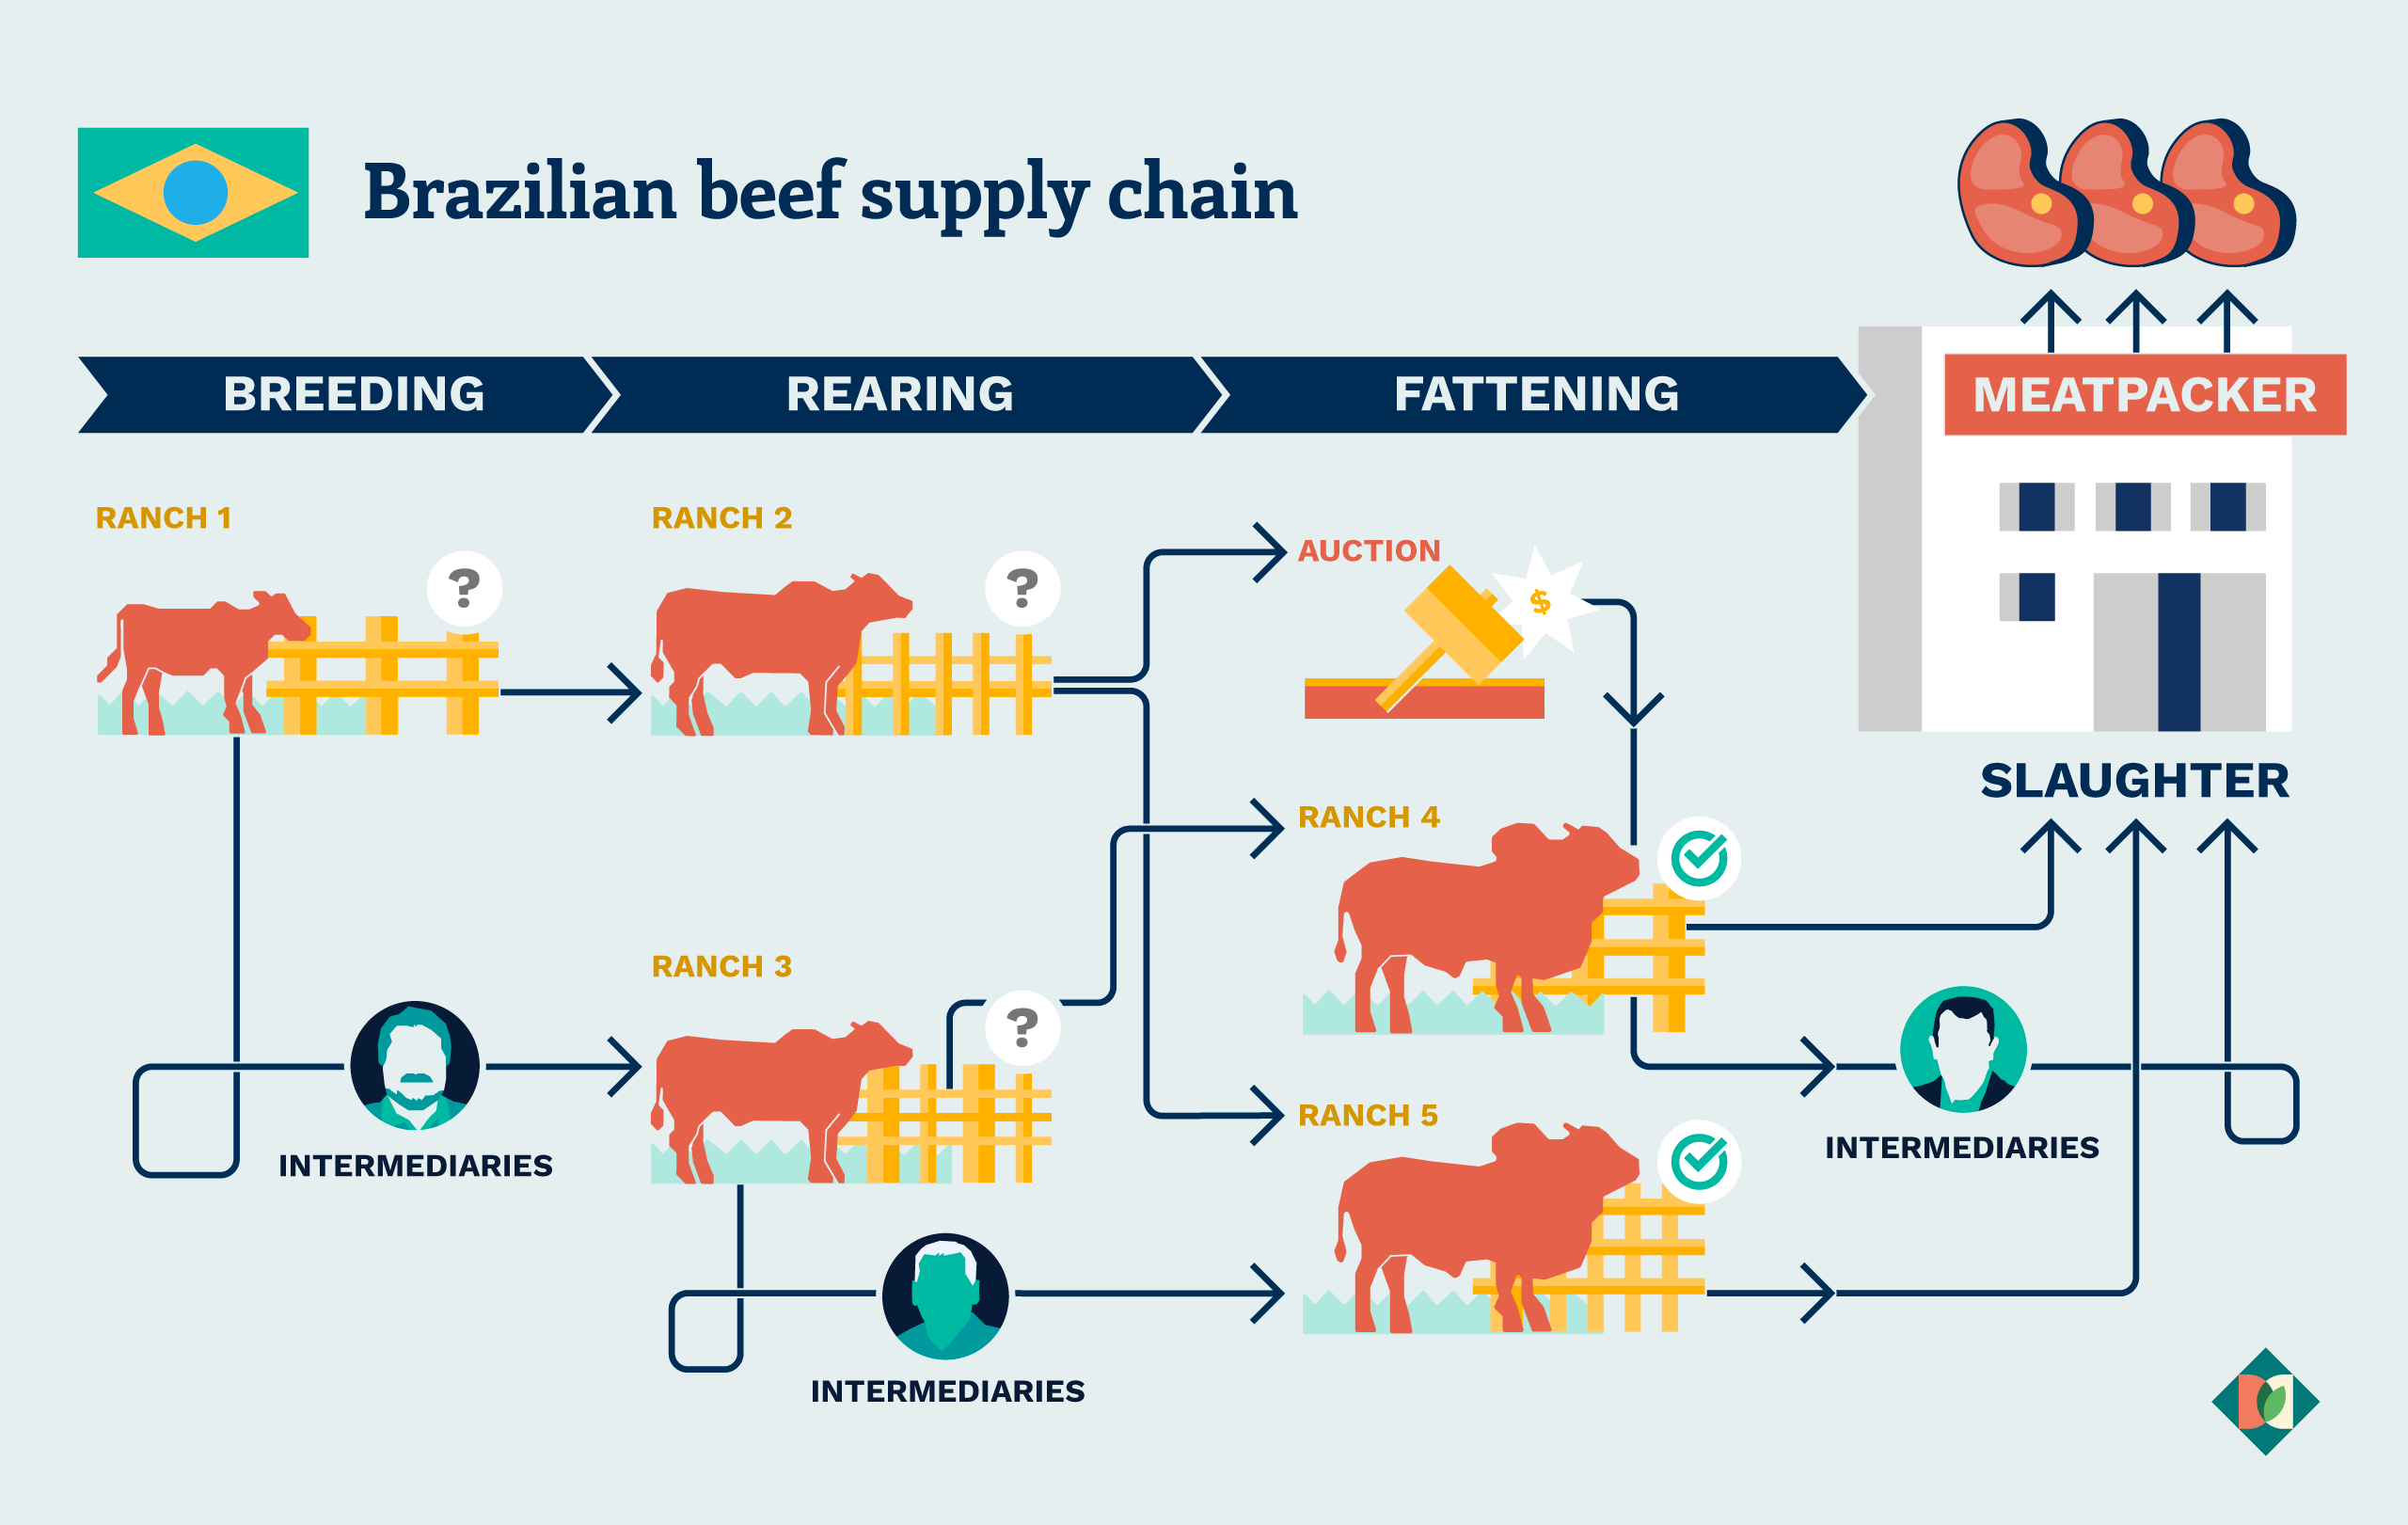 Graphic of the beef supply chain in Brazil, with the headings: Breeding, Rearing, Fattening, Slaughter and Meatpacker